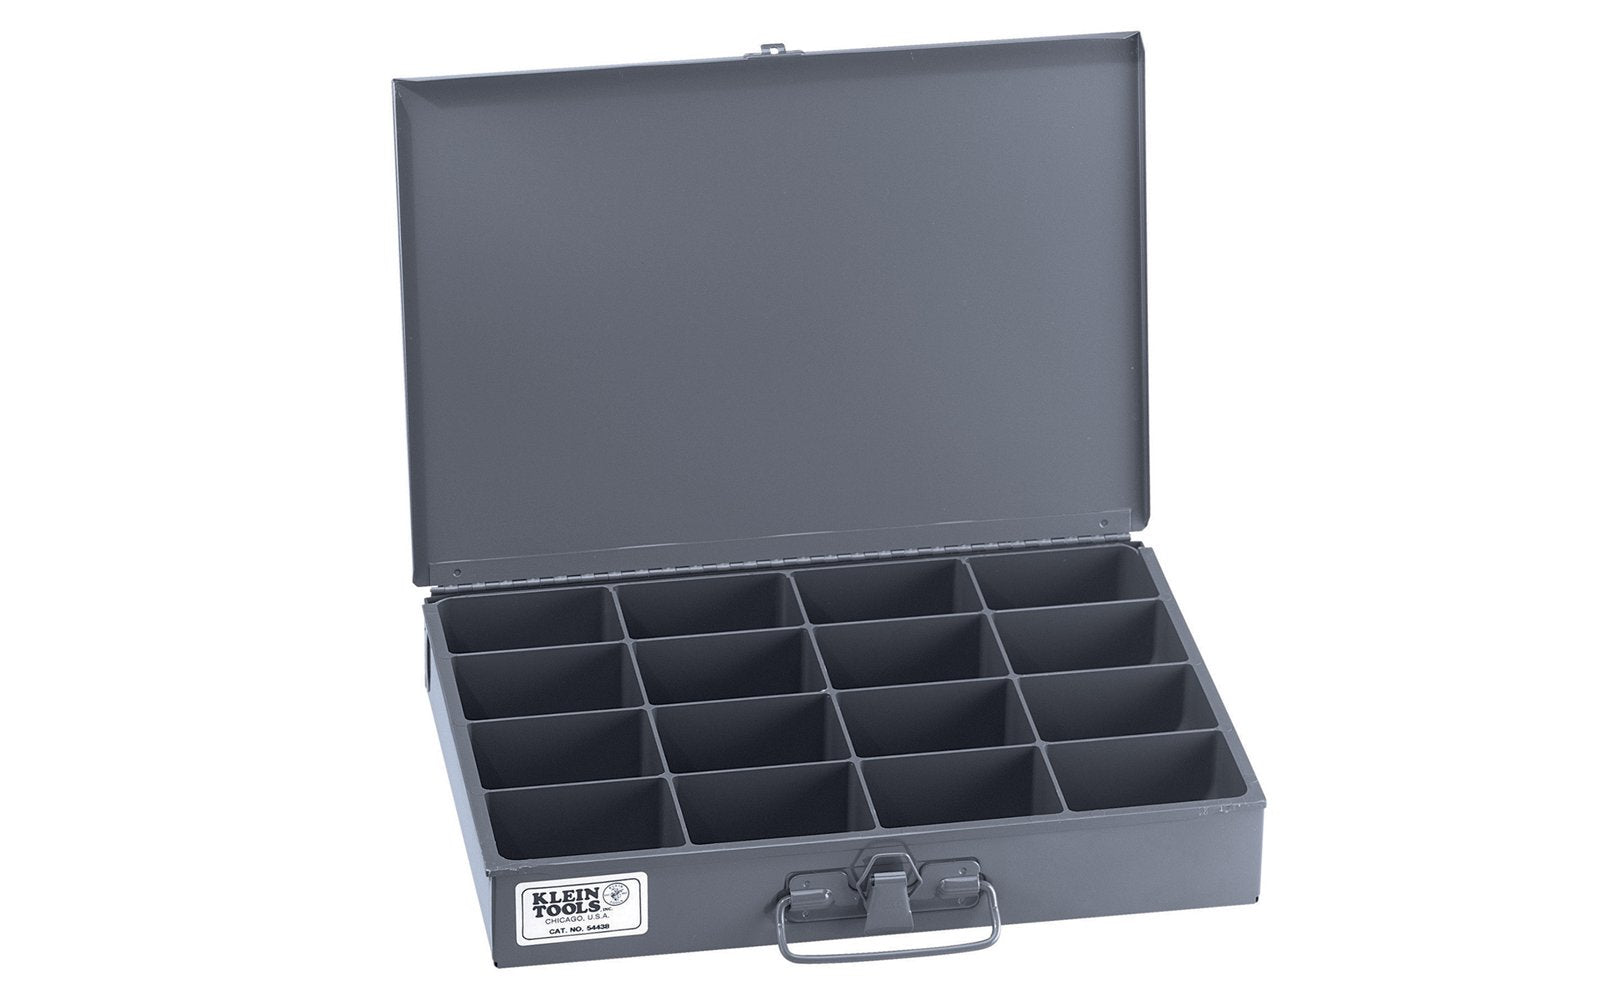 Klein Tools - Made in USA - Model 54438 - Outside box features strong metal, rigid, heavy-duty welded construction - Inside box compartments feature high-impact styrene construction - Compartment Sizes: 3-1/4" x 2-1/4" - Overall Size:  9-3/4" Deep x 13-1/2" Wide x 2" High - Box has a carrying handle - piano hinge 